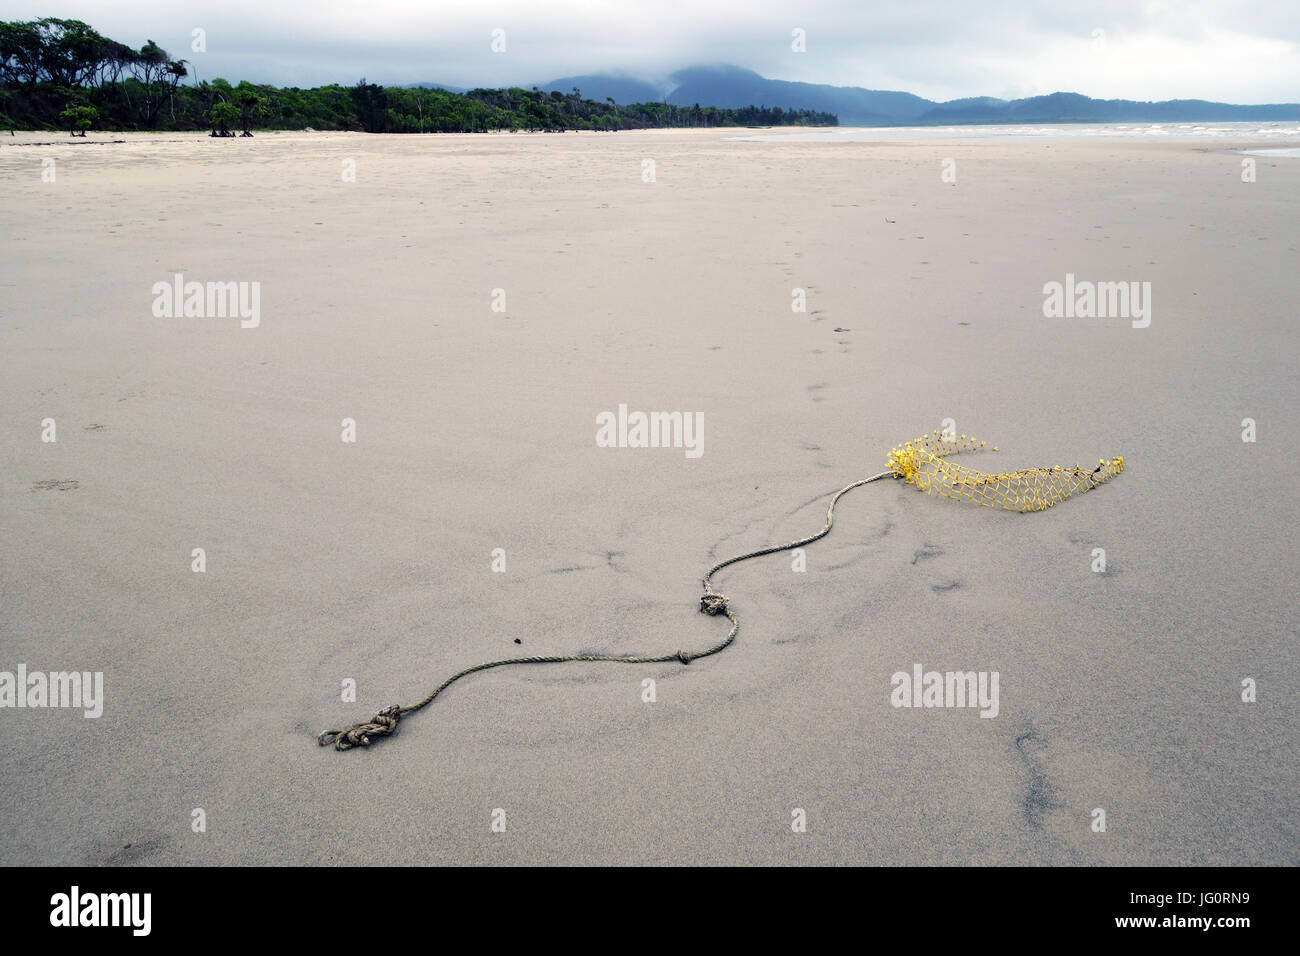 Ghost net buried in sand at the mouth of the Daintree River, on the shores of the Great Barrier Reef, far north Queensland, Australia Stock Photo